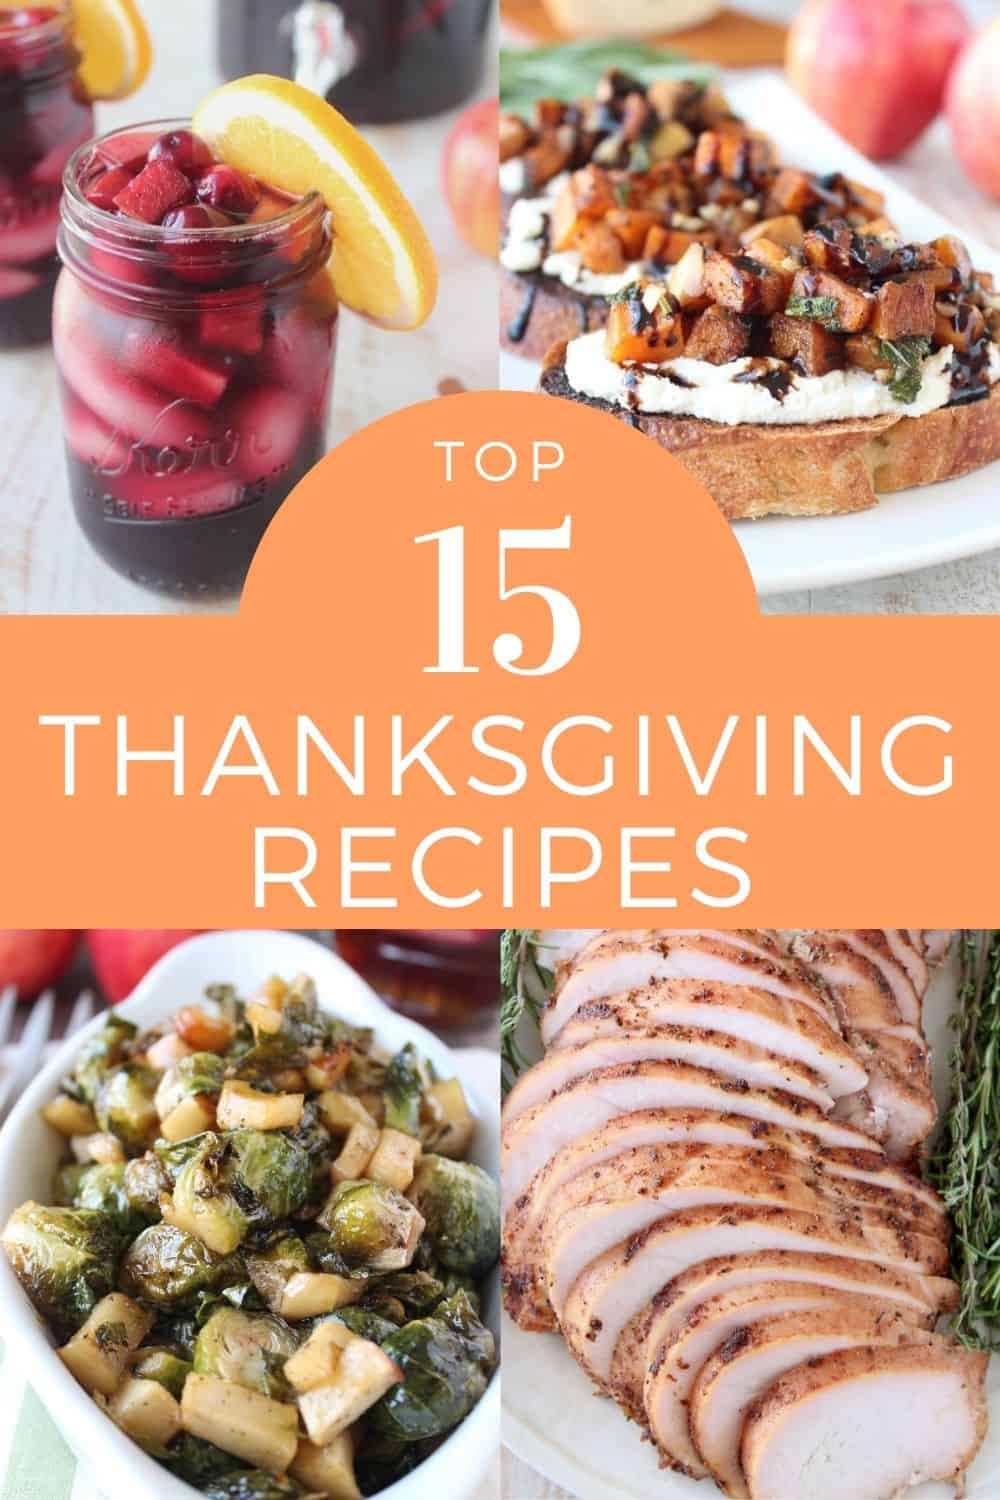 Top 15 Thanksgiving Recipes - WhitneyBond.com